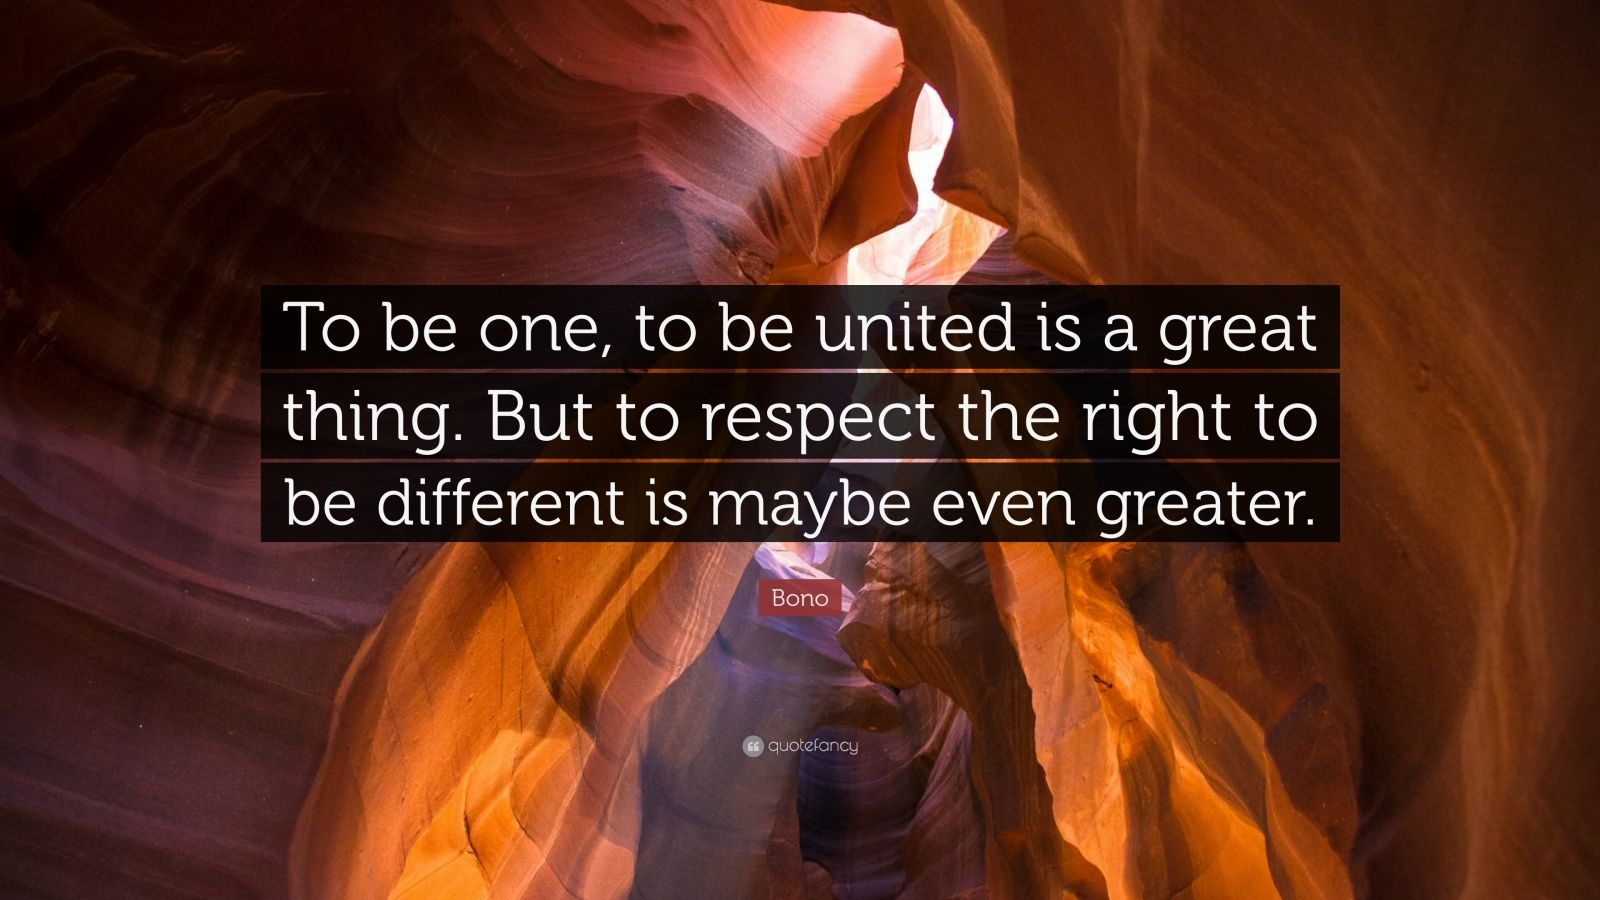 Bono Quote: “To be one, to be united is a great thing. But to respect